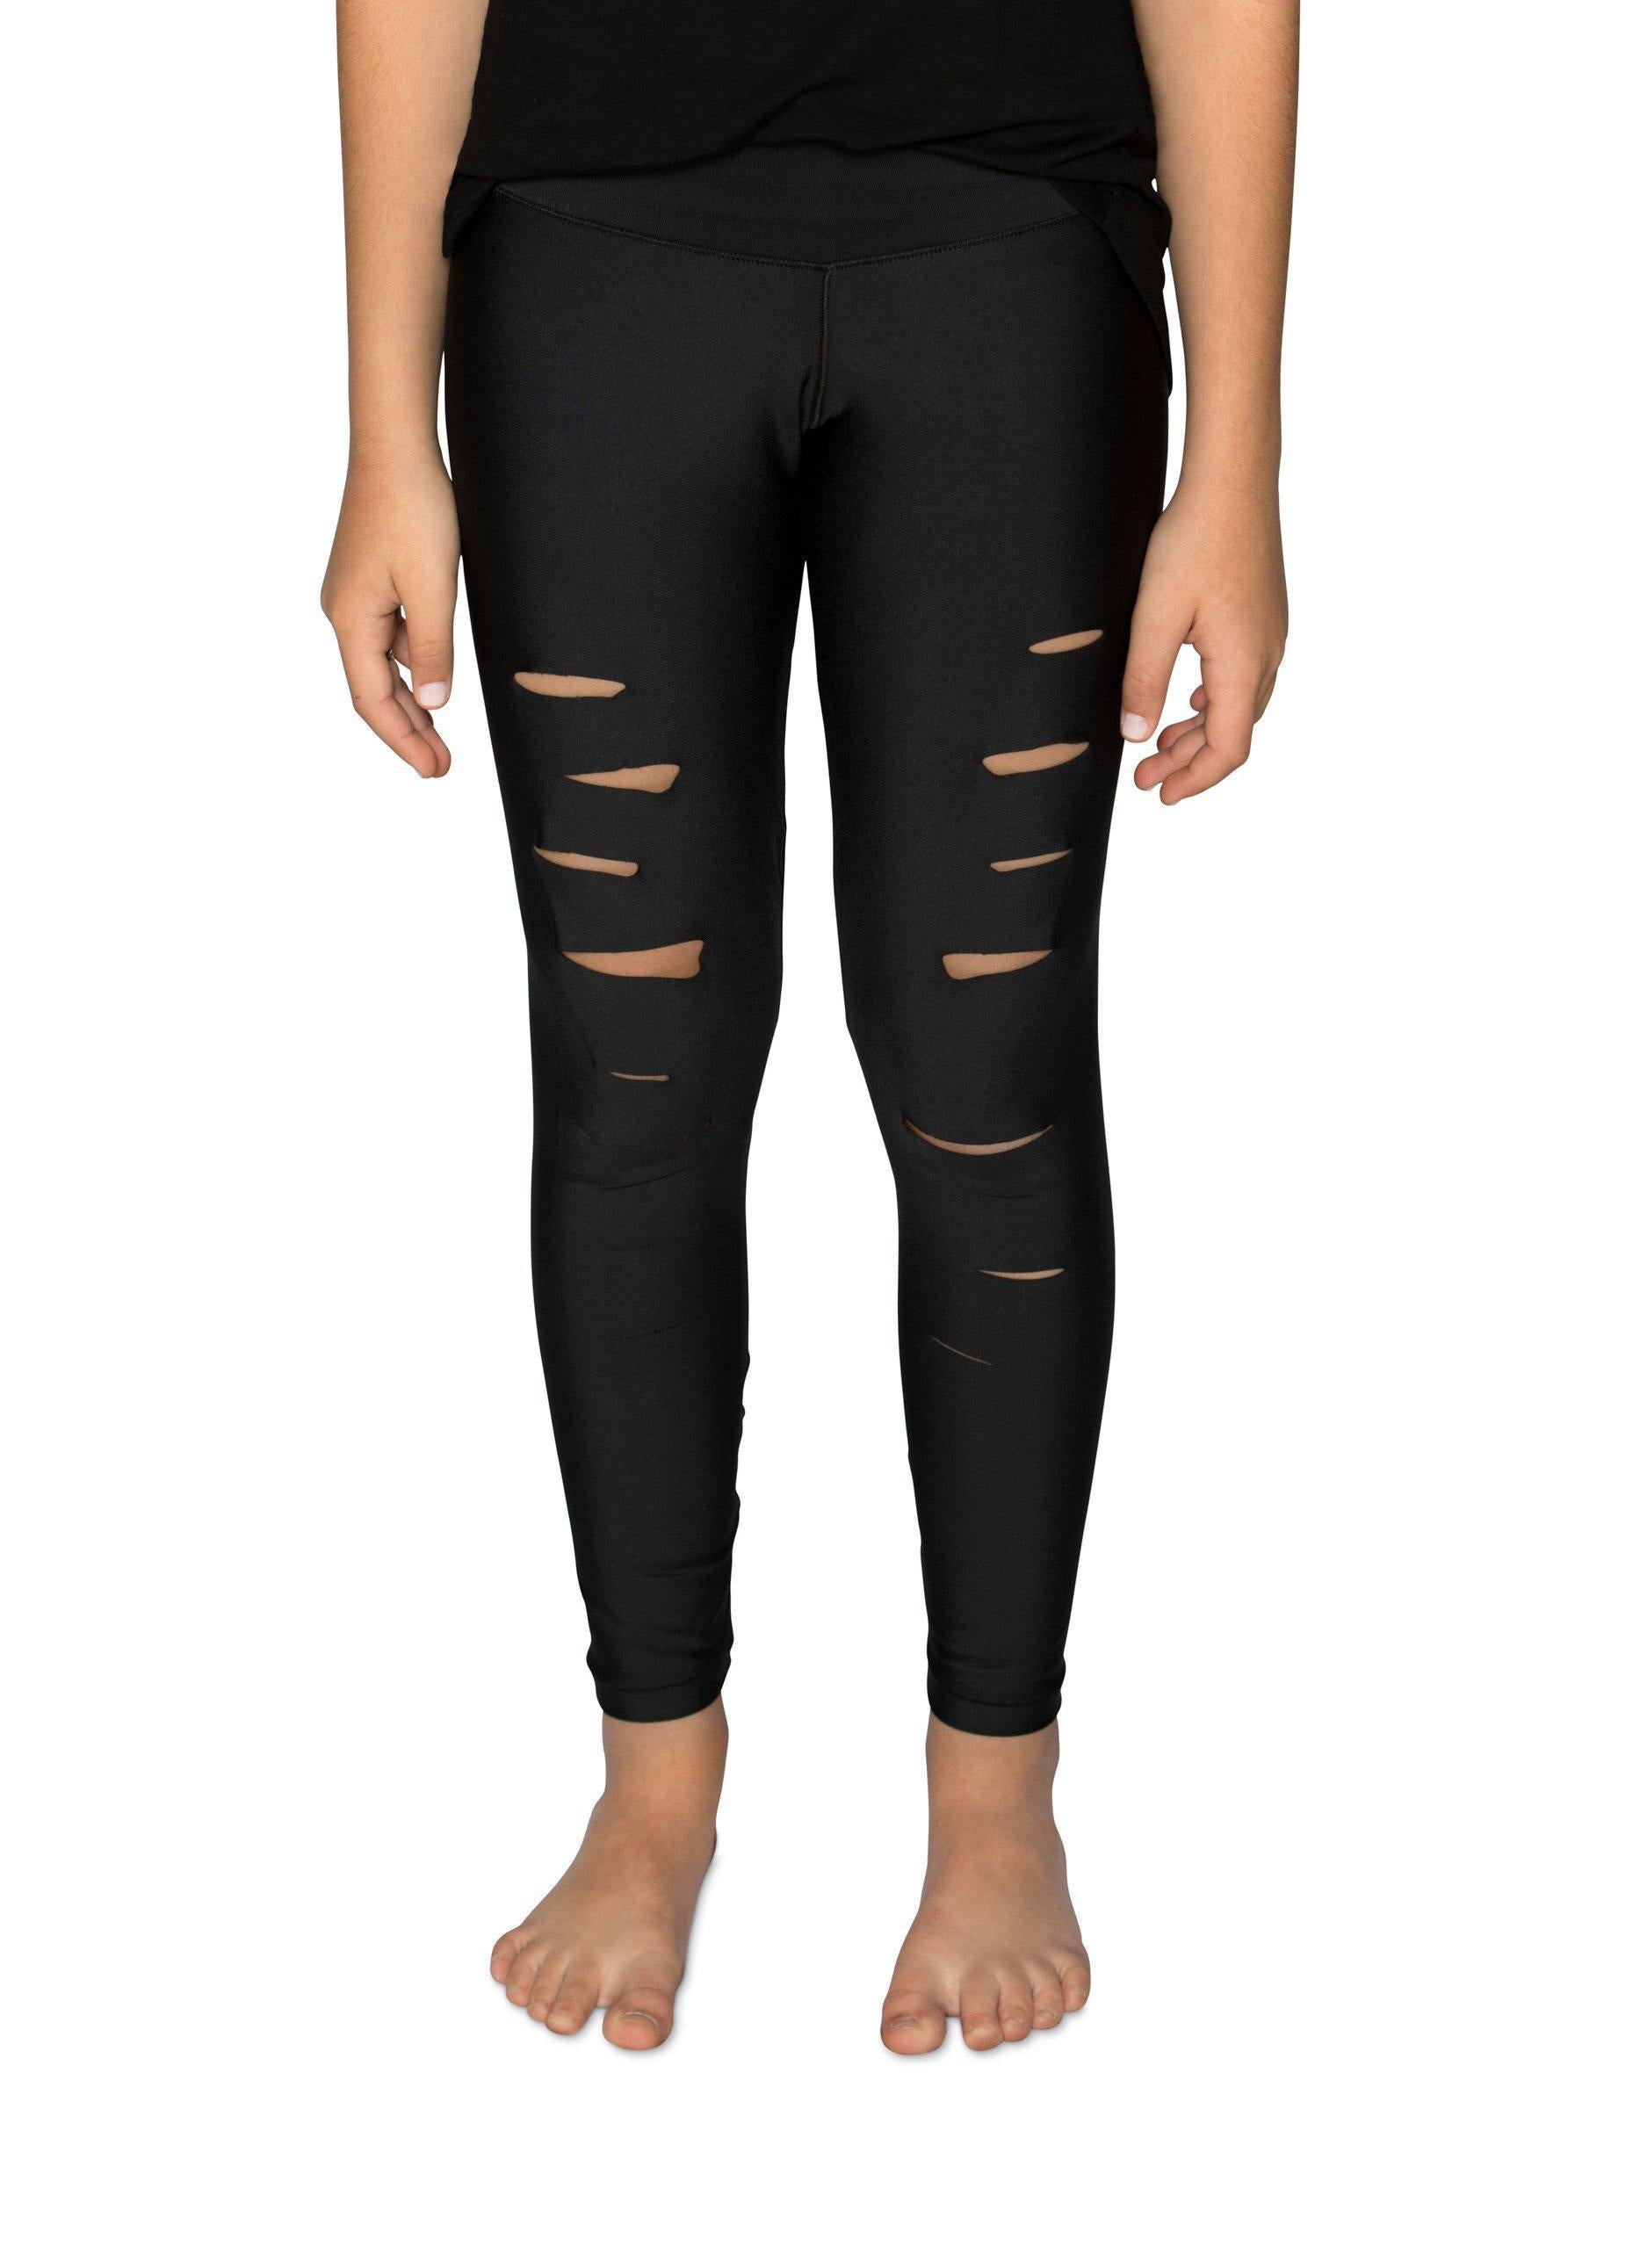 Are Ripped Leggings Trendy In 2023? – LIFESTYLE BY PS